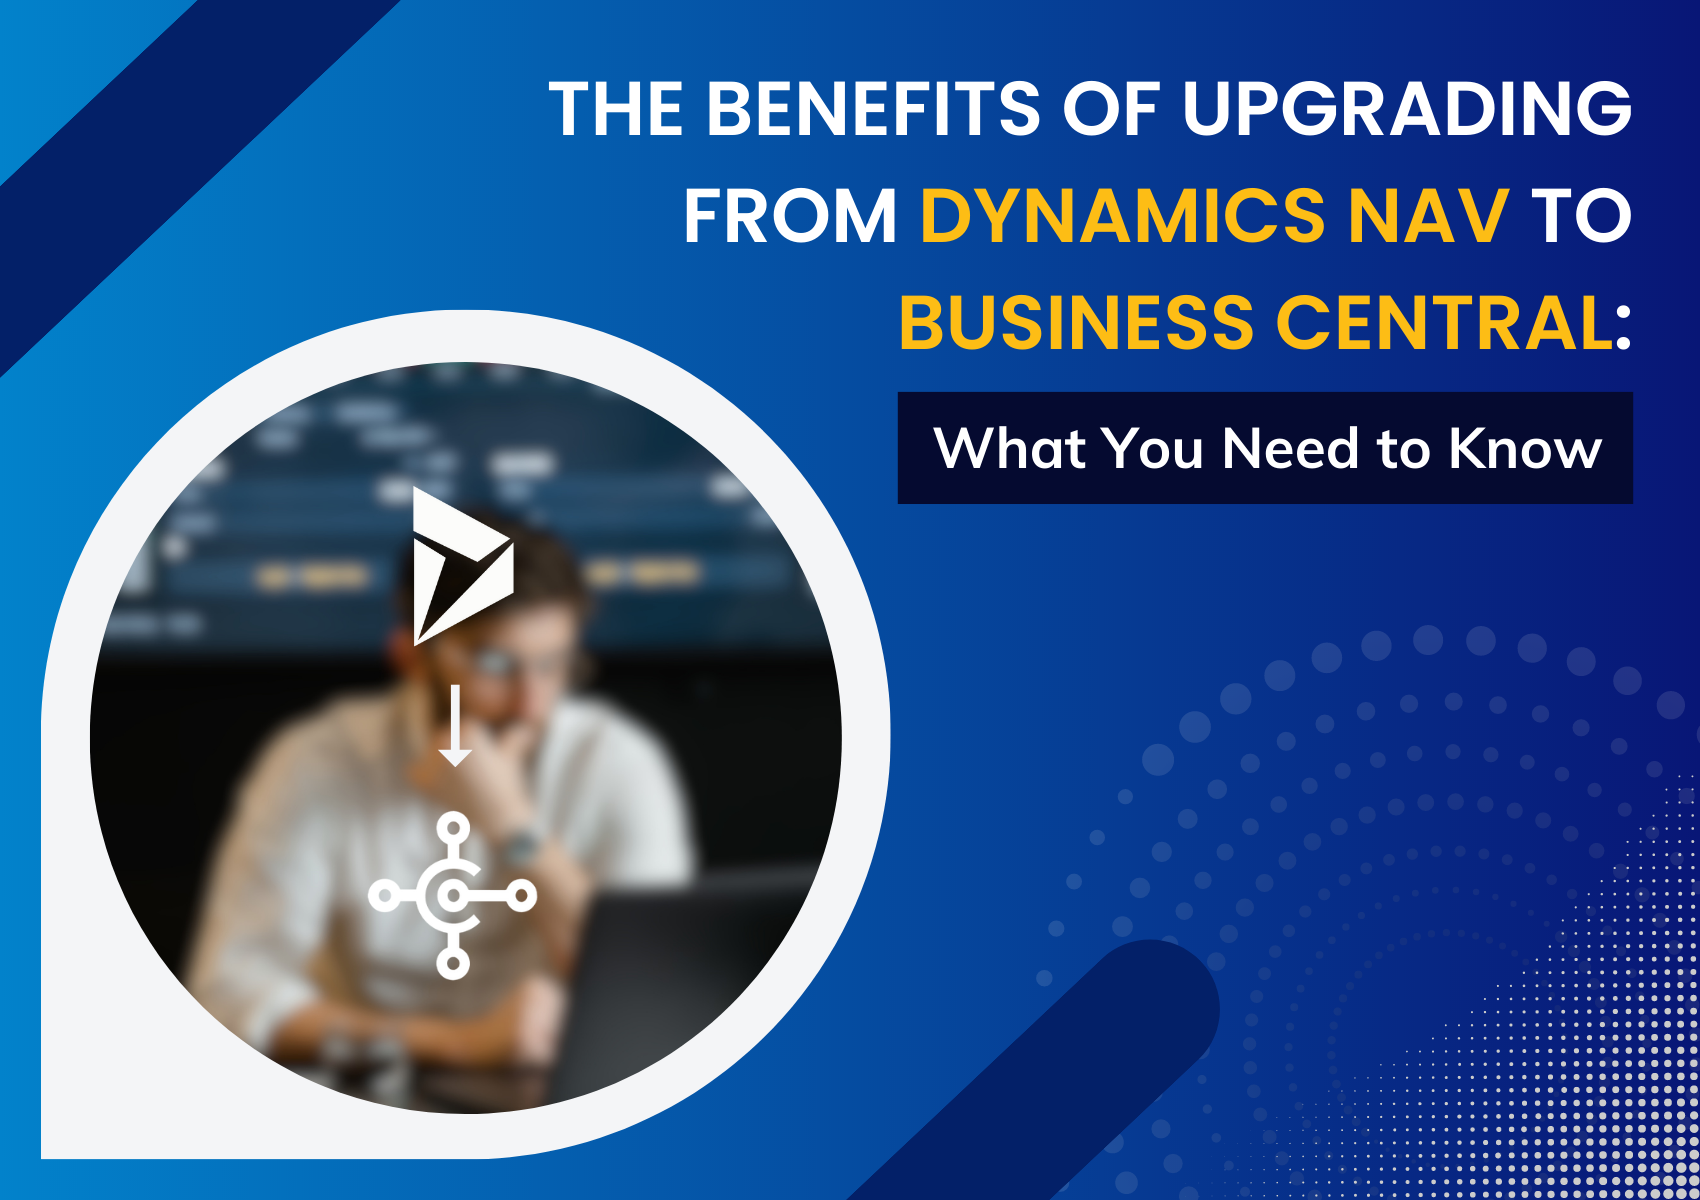 The Benefits of Upgrading to Business Central from Dynamics NAV